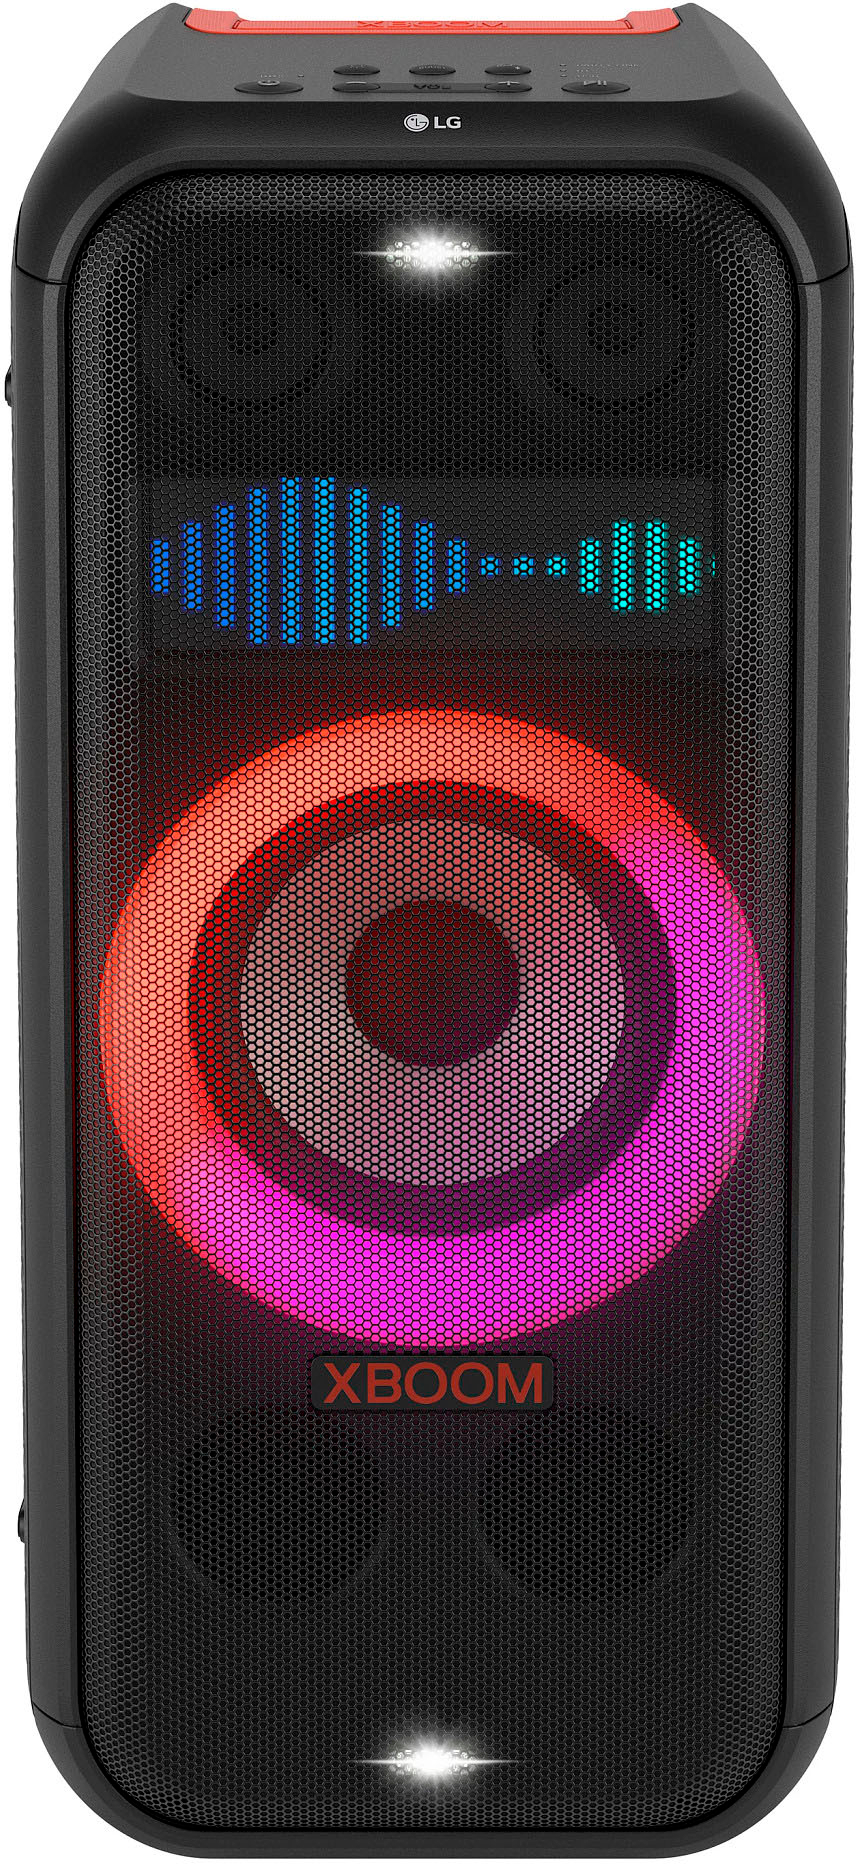 Black Buy Speaker XL7 XL7S Tower with Best - XBOOM Pixel LED Portable Party LG